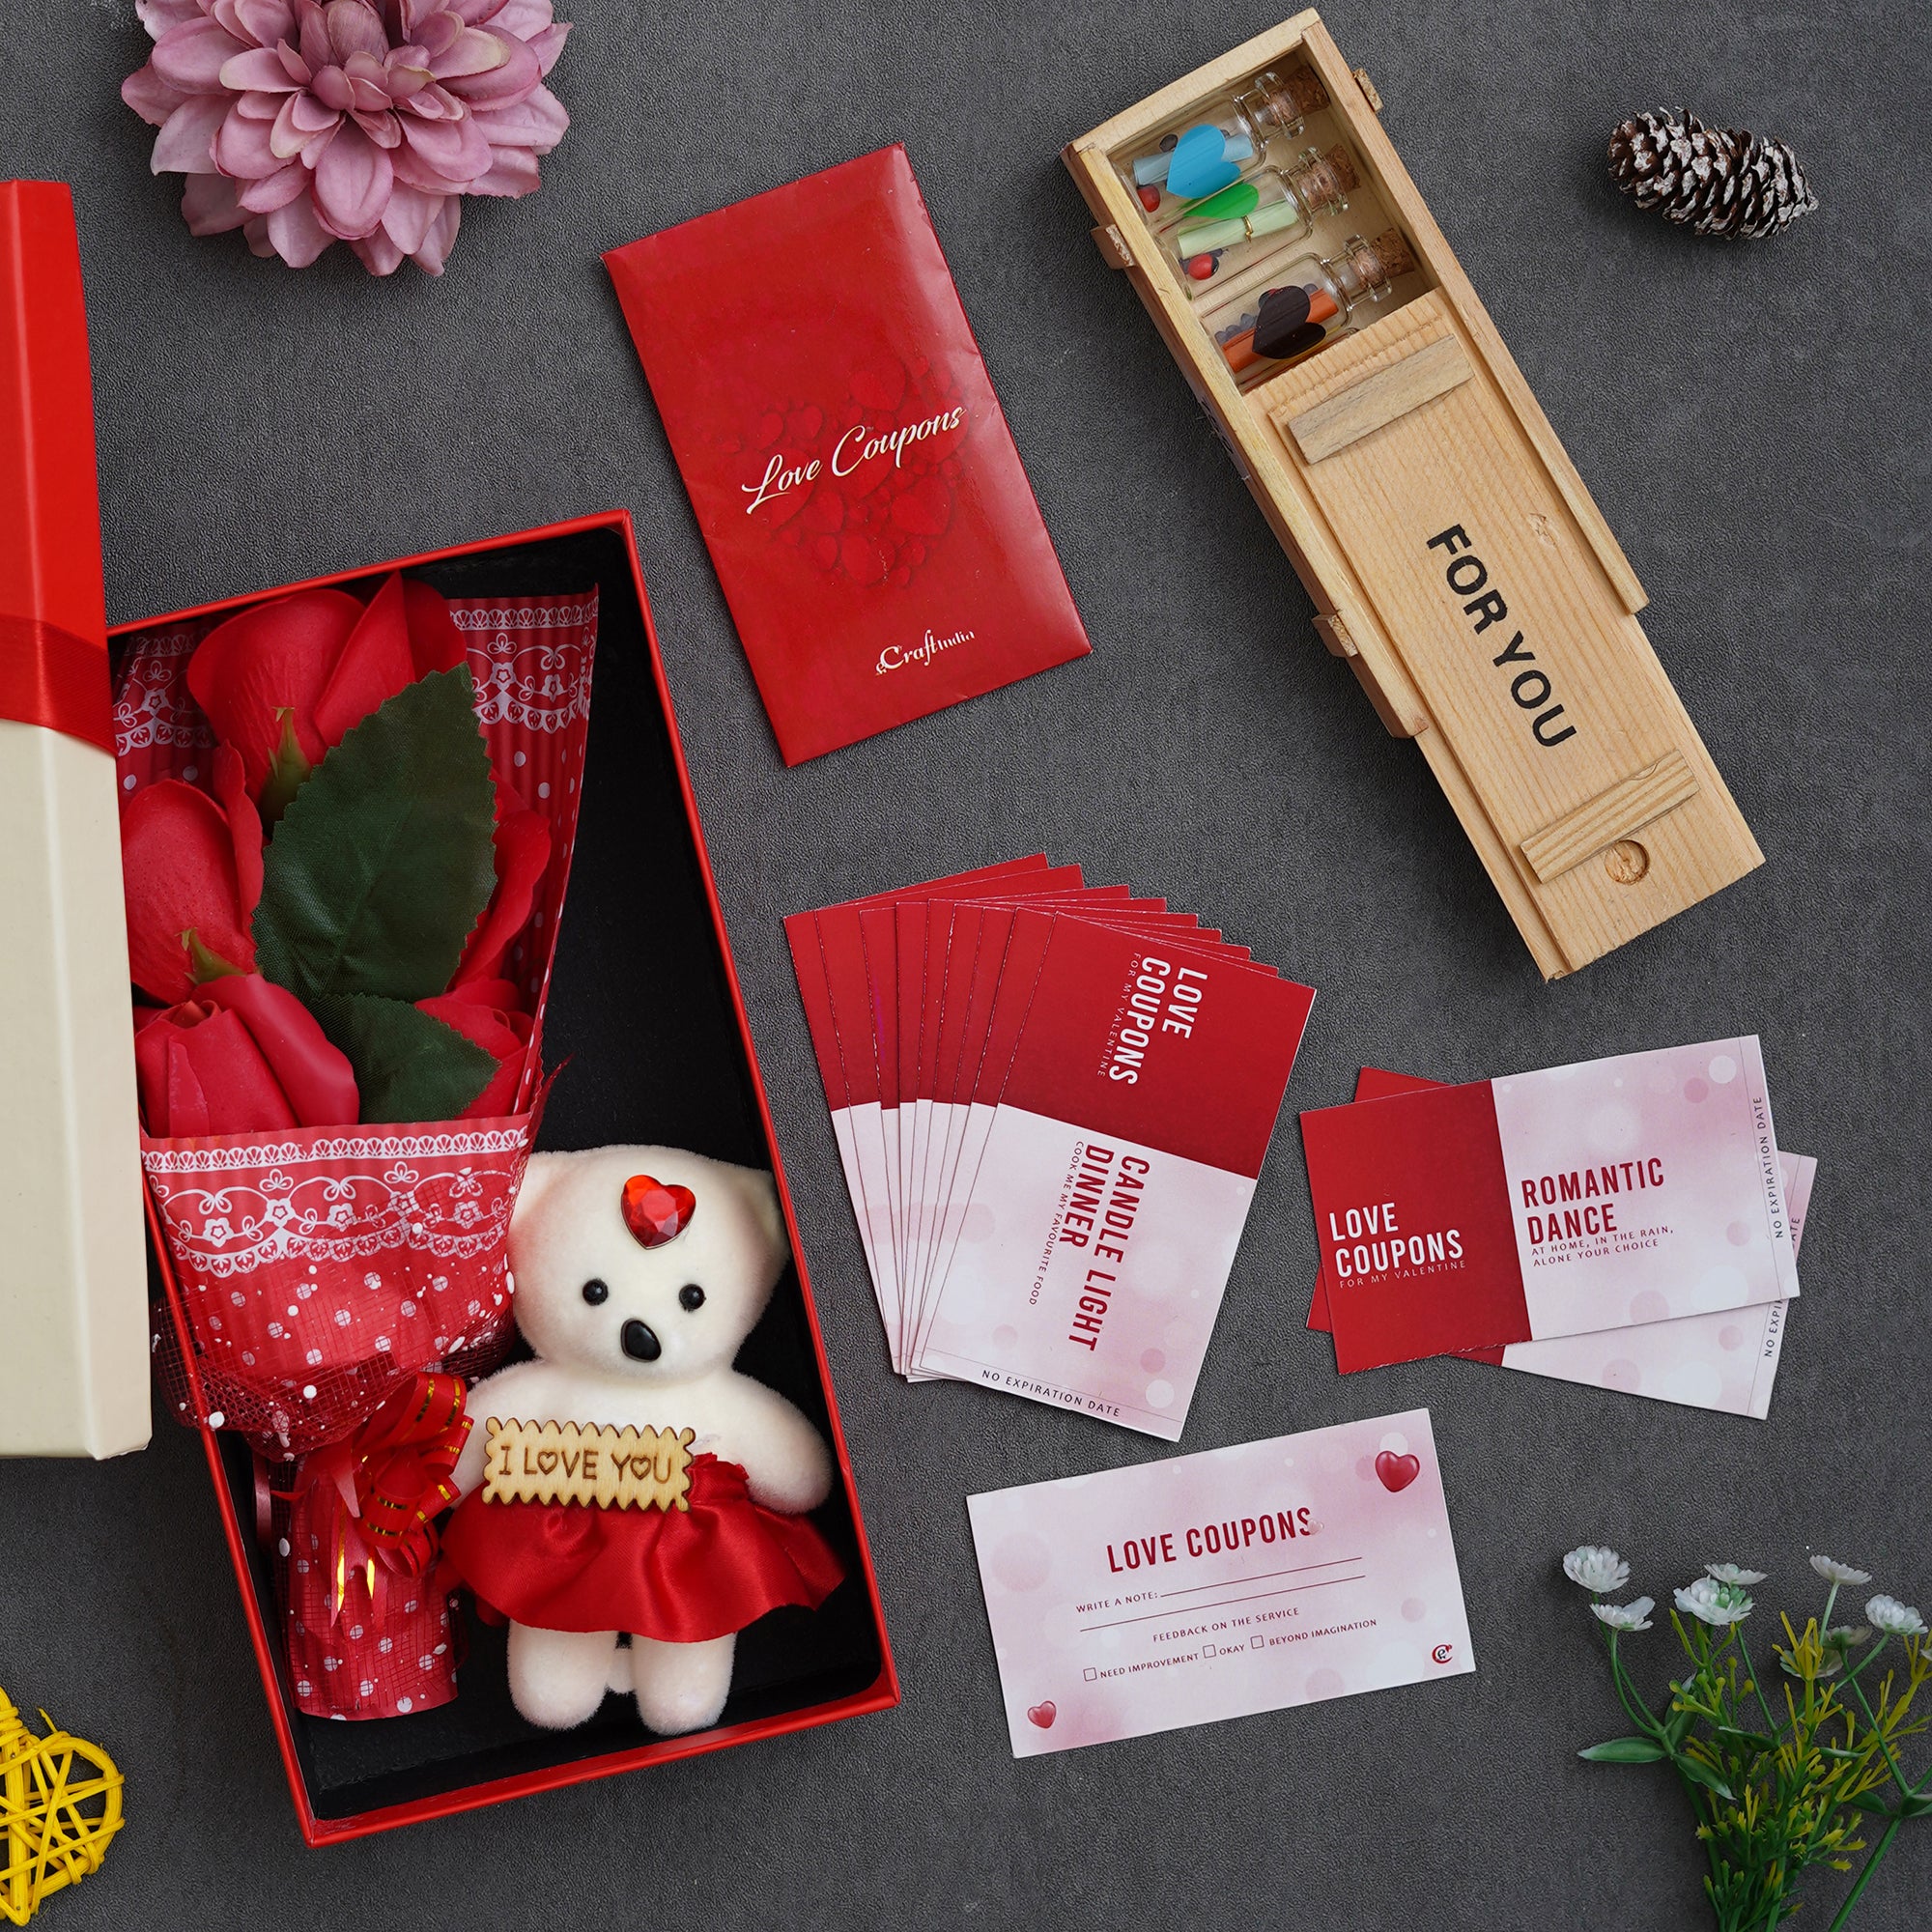 Valentine Combo of Pack of 12 Love Coupons Gift Cards Set, Red Roses Bouquet and White, Red Teddy Bear Valentine's Rectangle Shaped Gift Box, Wooden Box "For You" Message Bottle Set